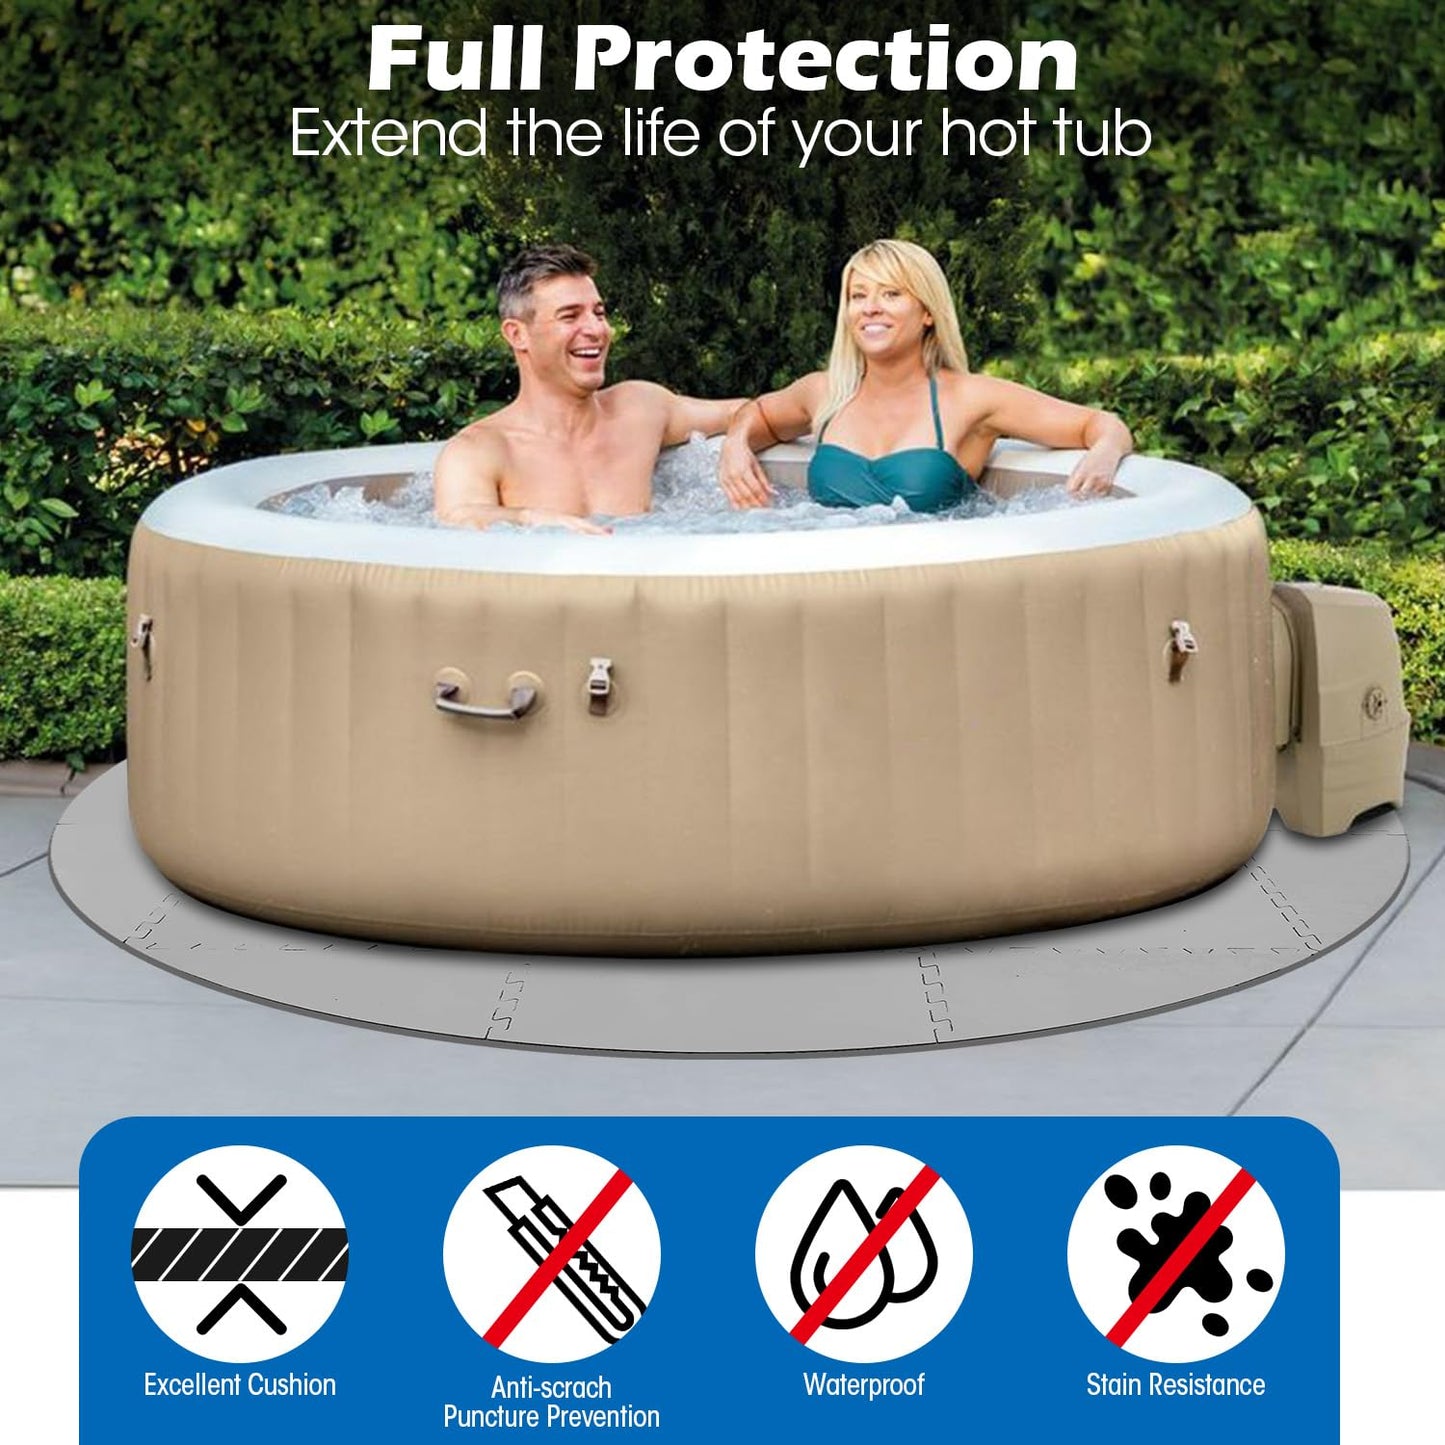 78 Inch Round Hot Tub Mat - Extra-thick Interlocking Hot Tub Protective Pad Spa Pool Foam Insulation Mat Ground Base Flooring Protector for Portable Inflatable Hot Tub Accessories Outdoor Indoor